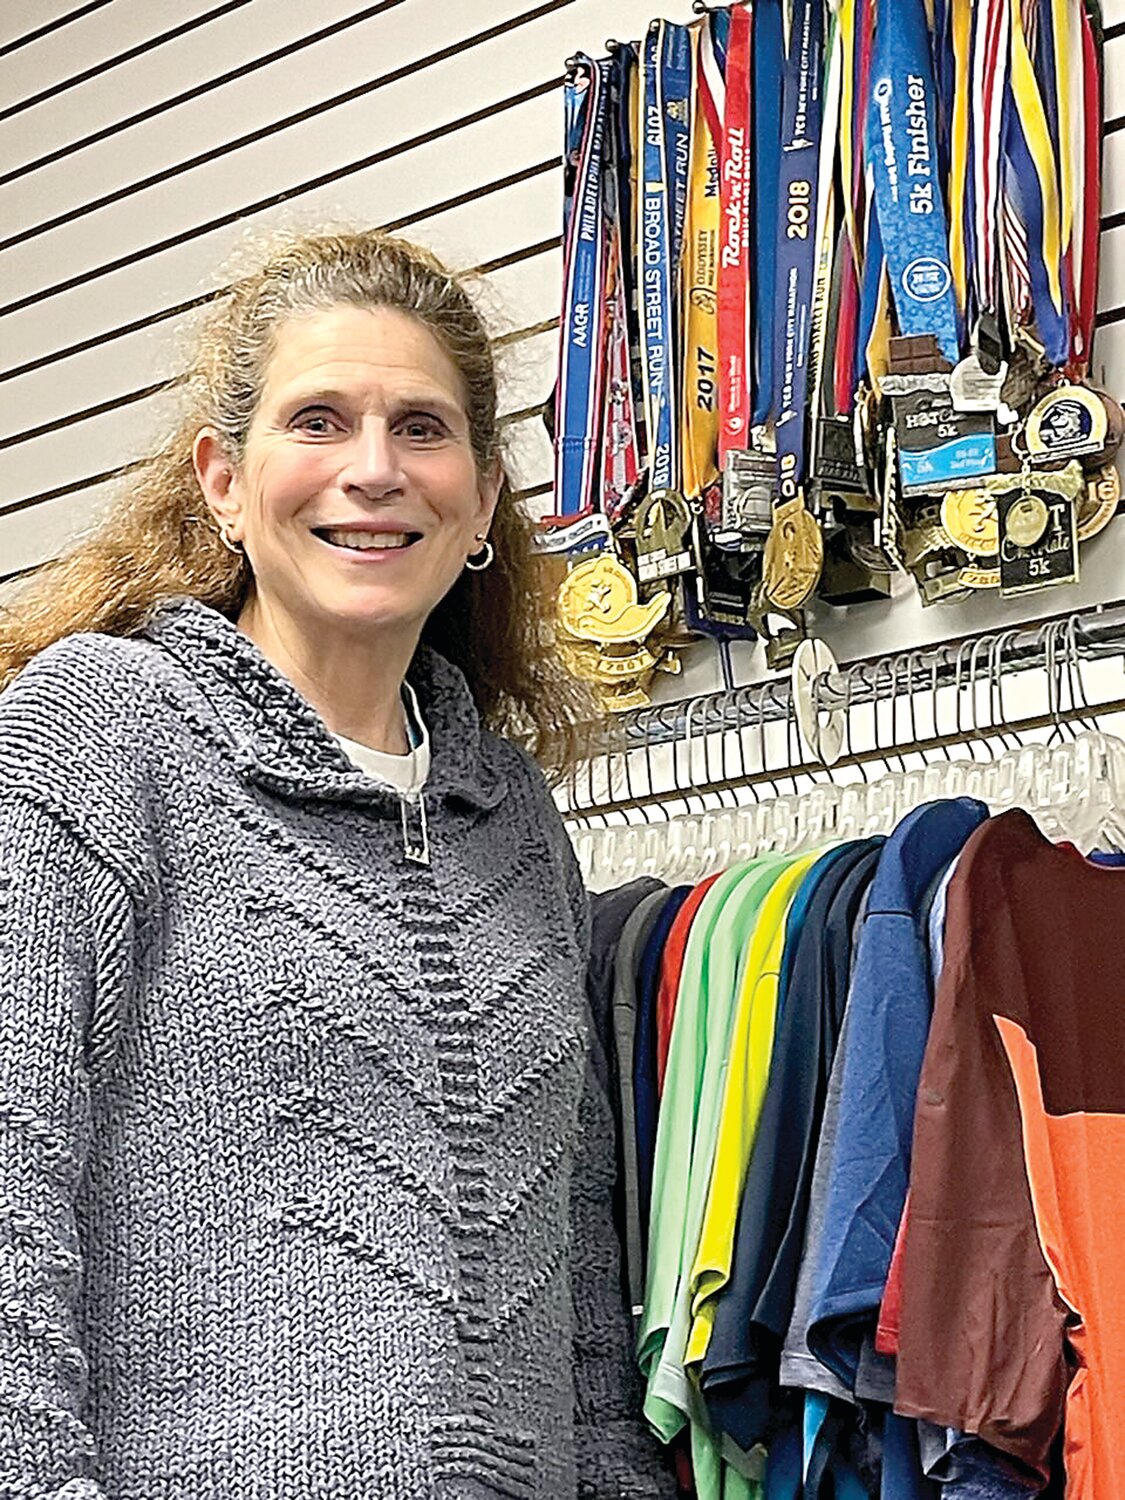 Hilary Goodman has competed in hundreds of races, including 40 marathons.